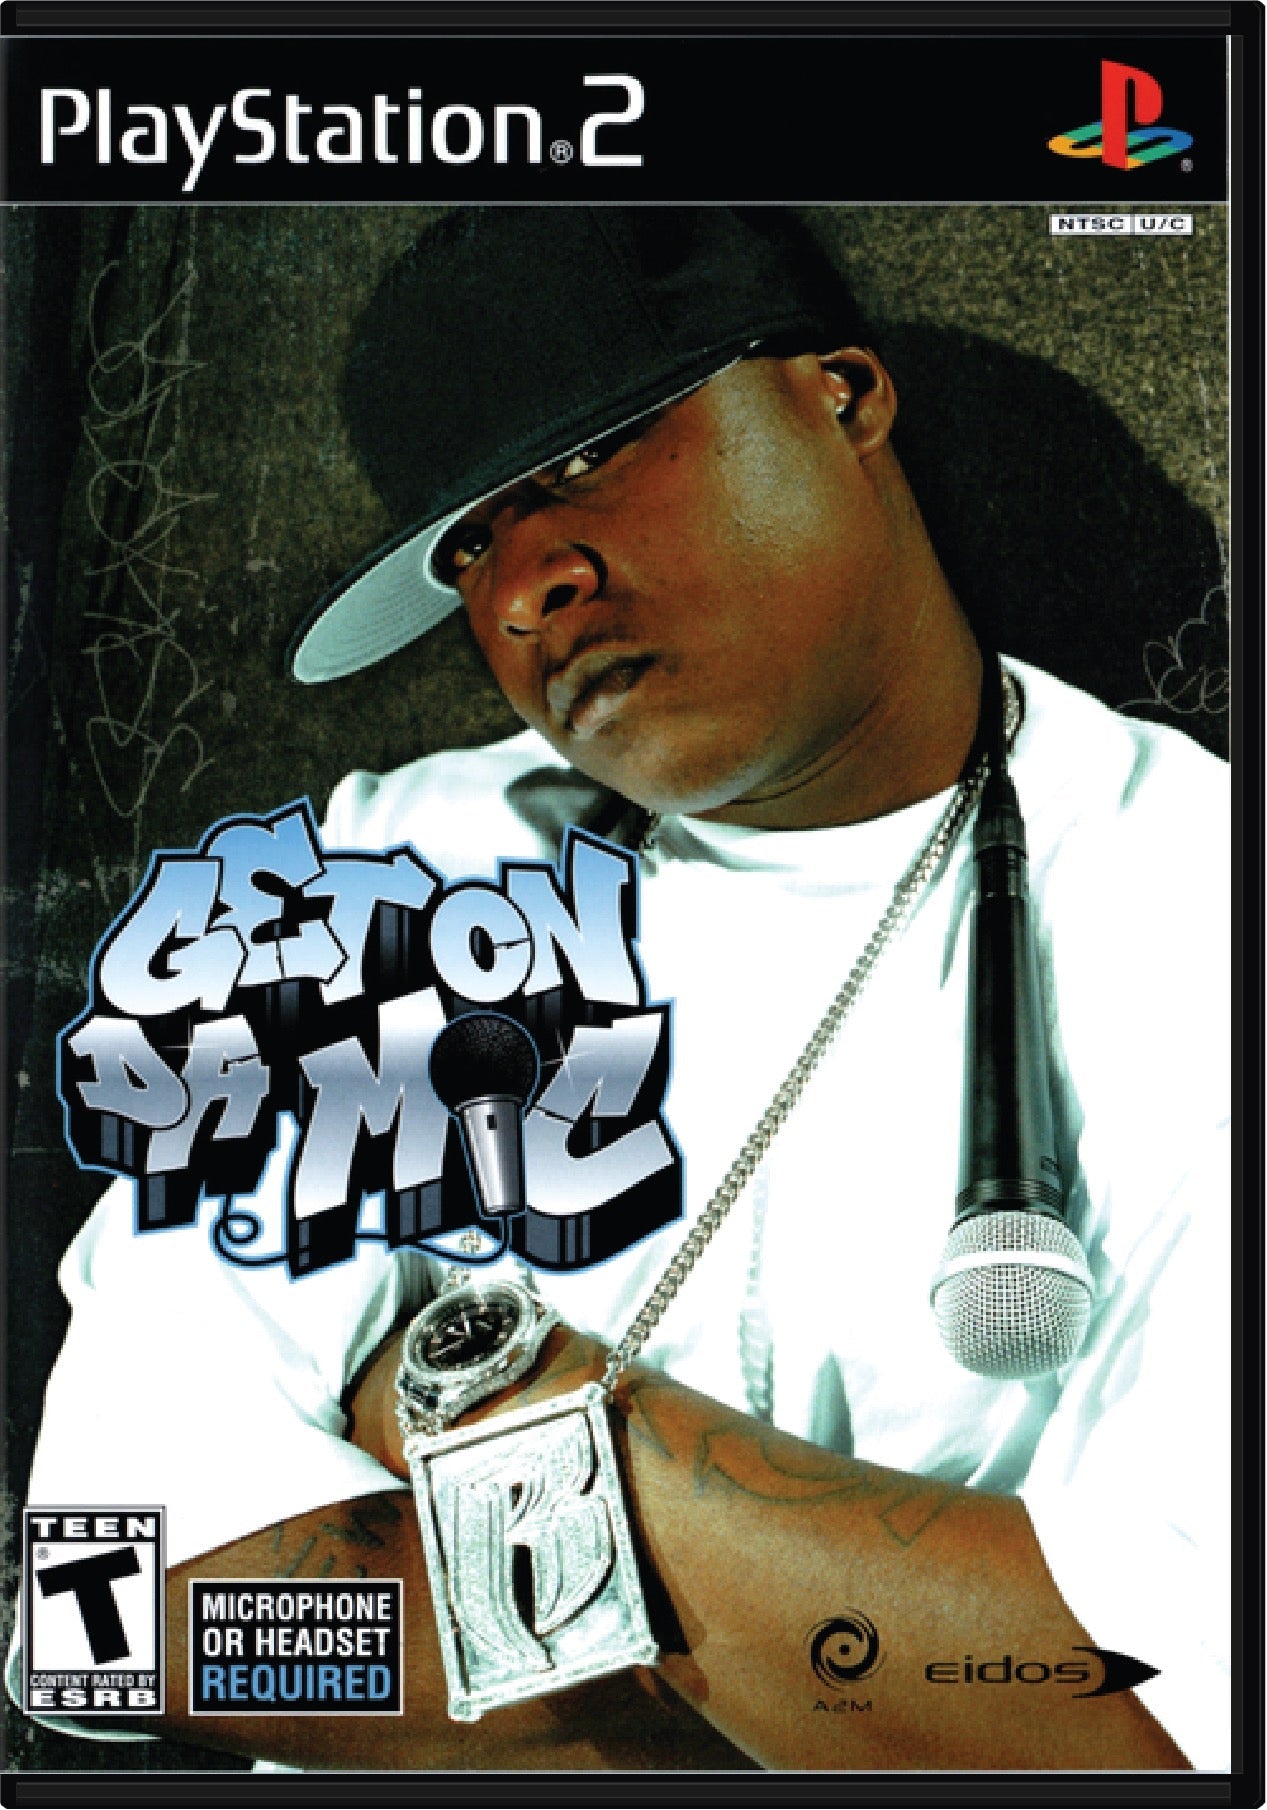 Get on Da Mic Cover Art and Product Photo